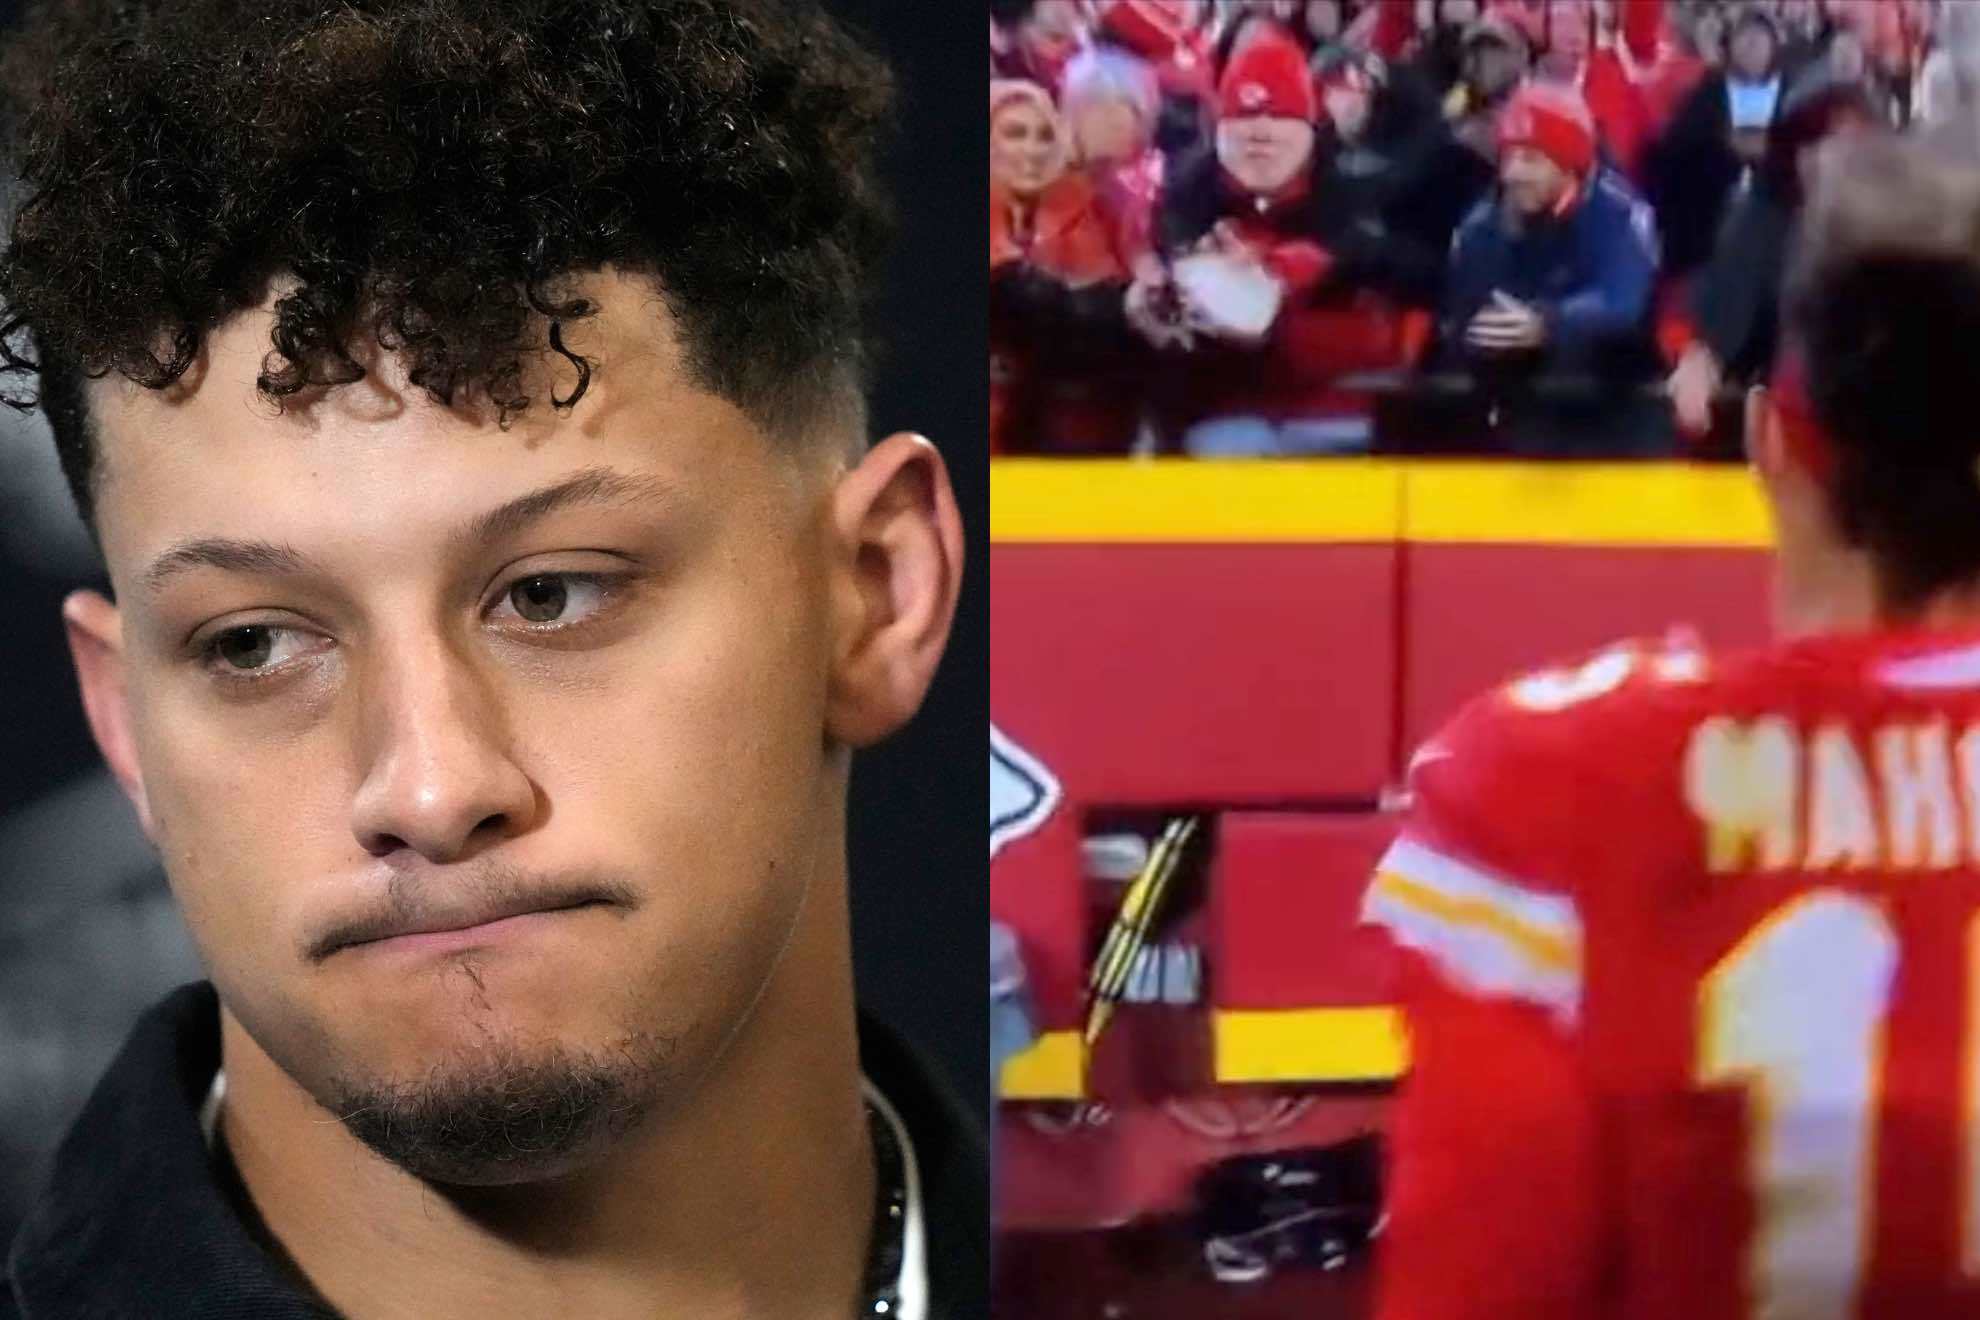 Patrick Mahomes trolled by Kansas City Chiefs fan: one final dropped pass vs the Eagles